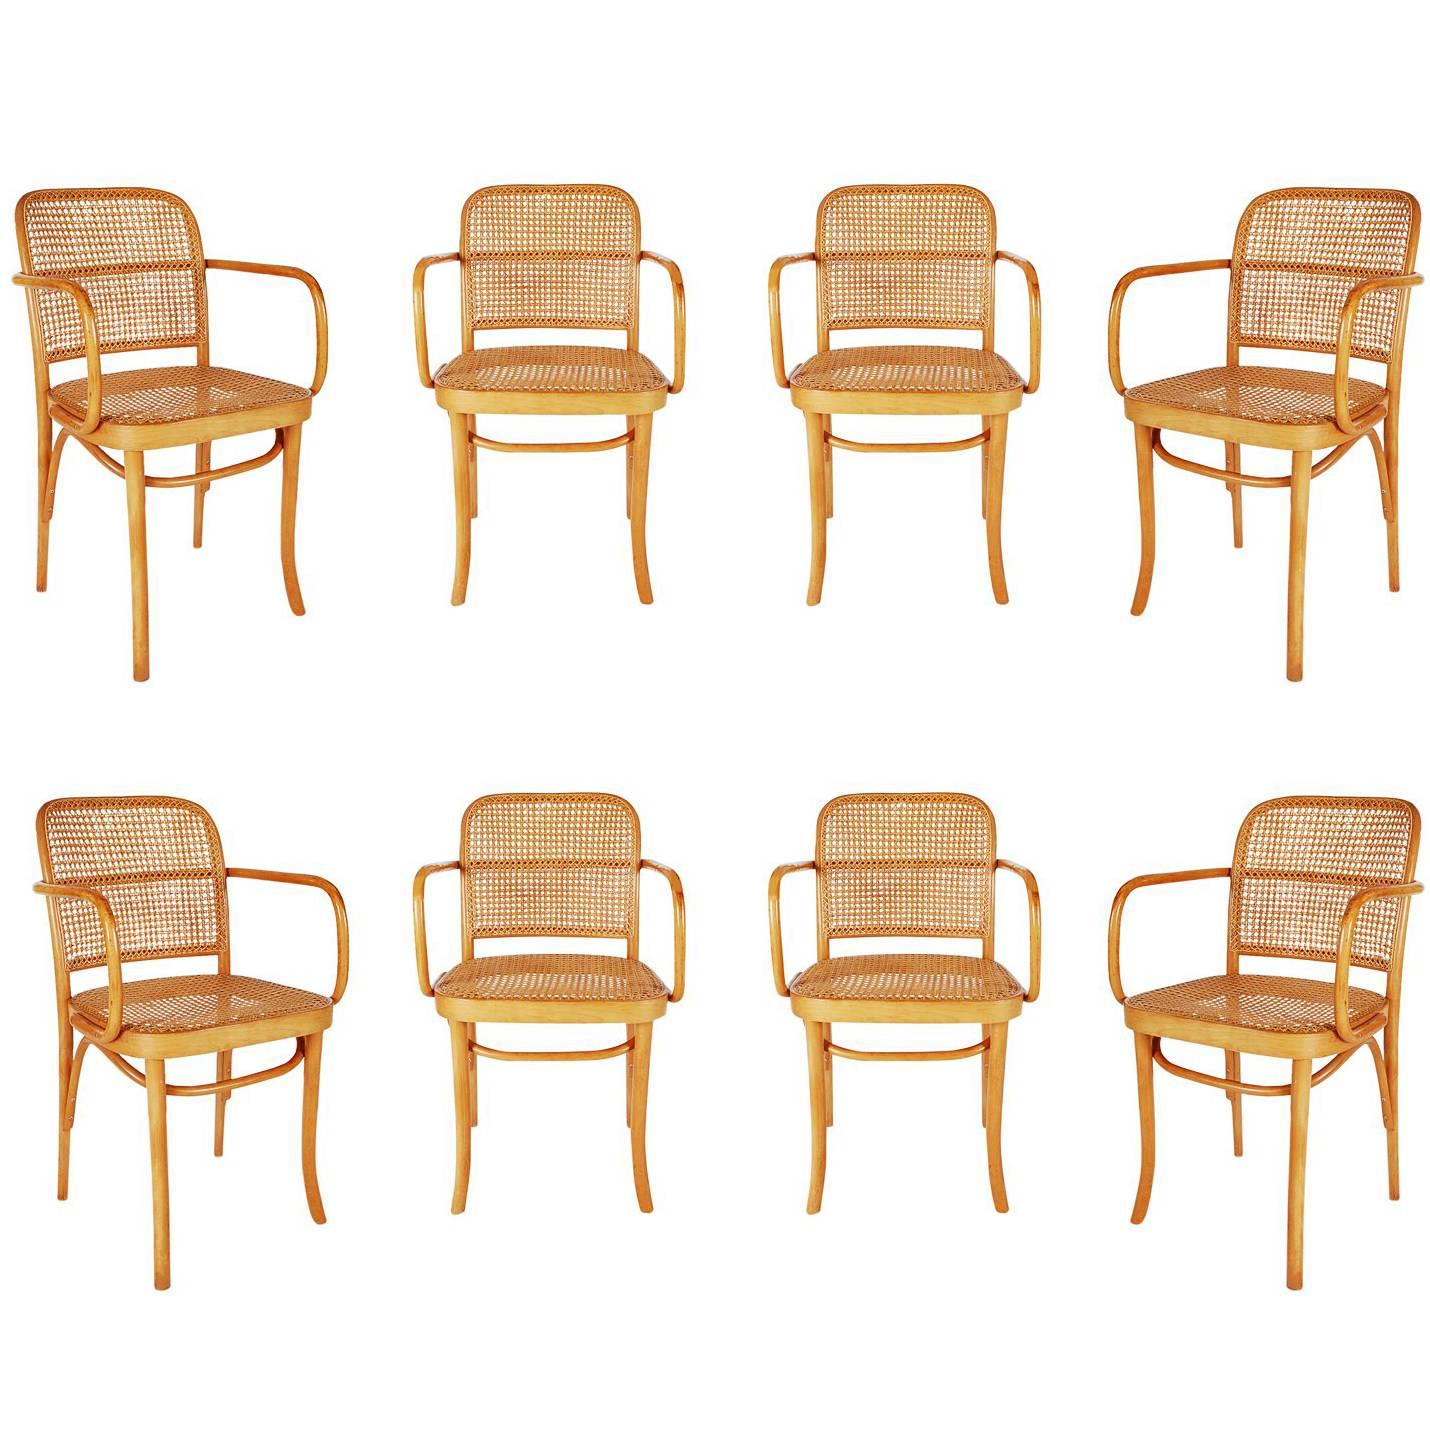 Set of Eight Mid-Century Modern Cane Dining Chairs after Josef Frank Thonet